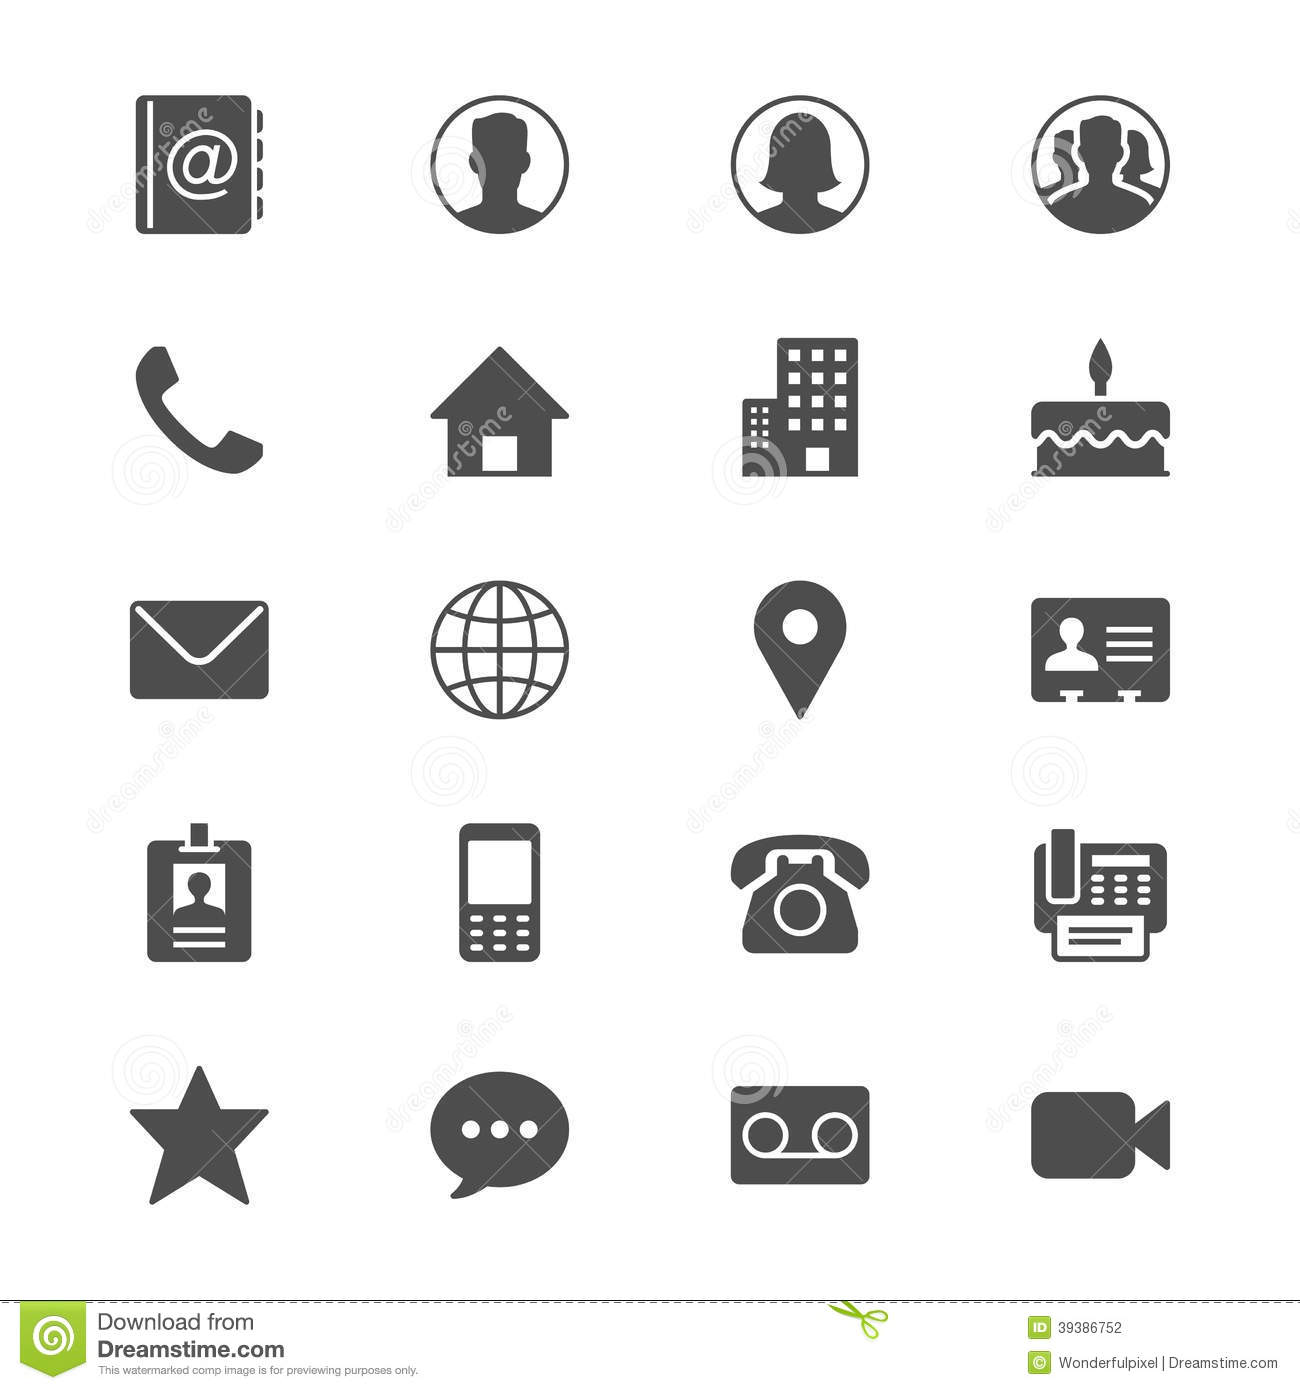 Contact Icons Vector Free